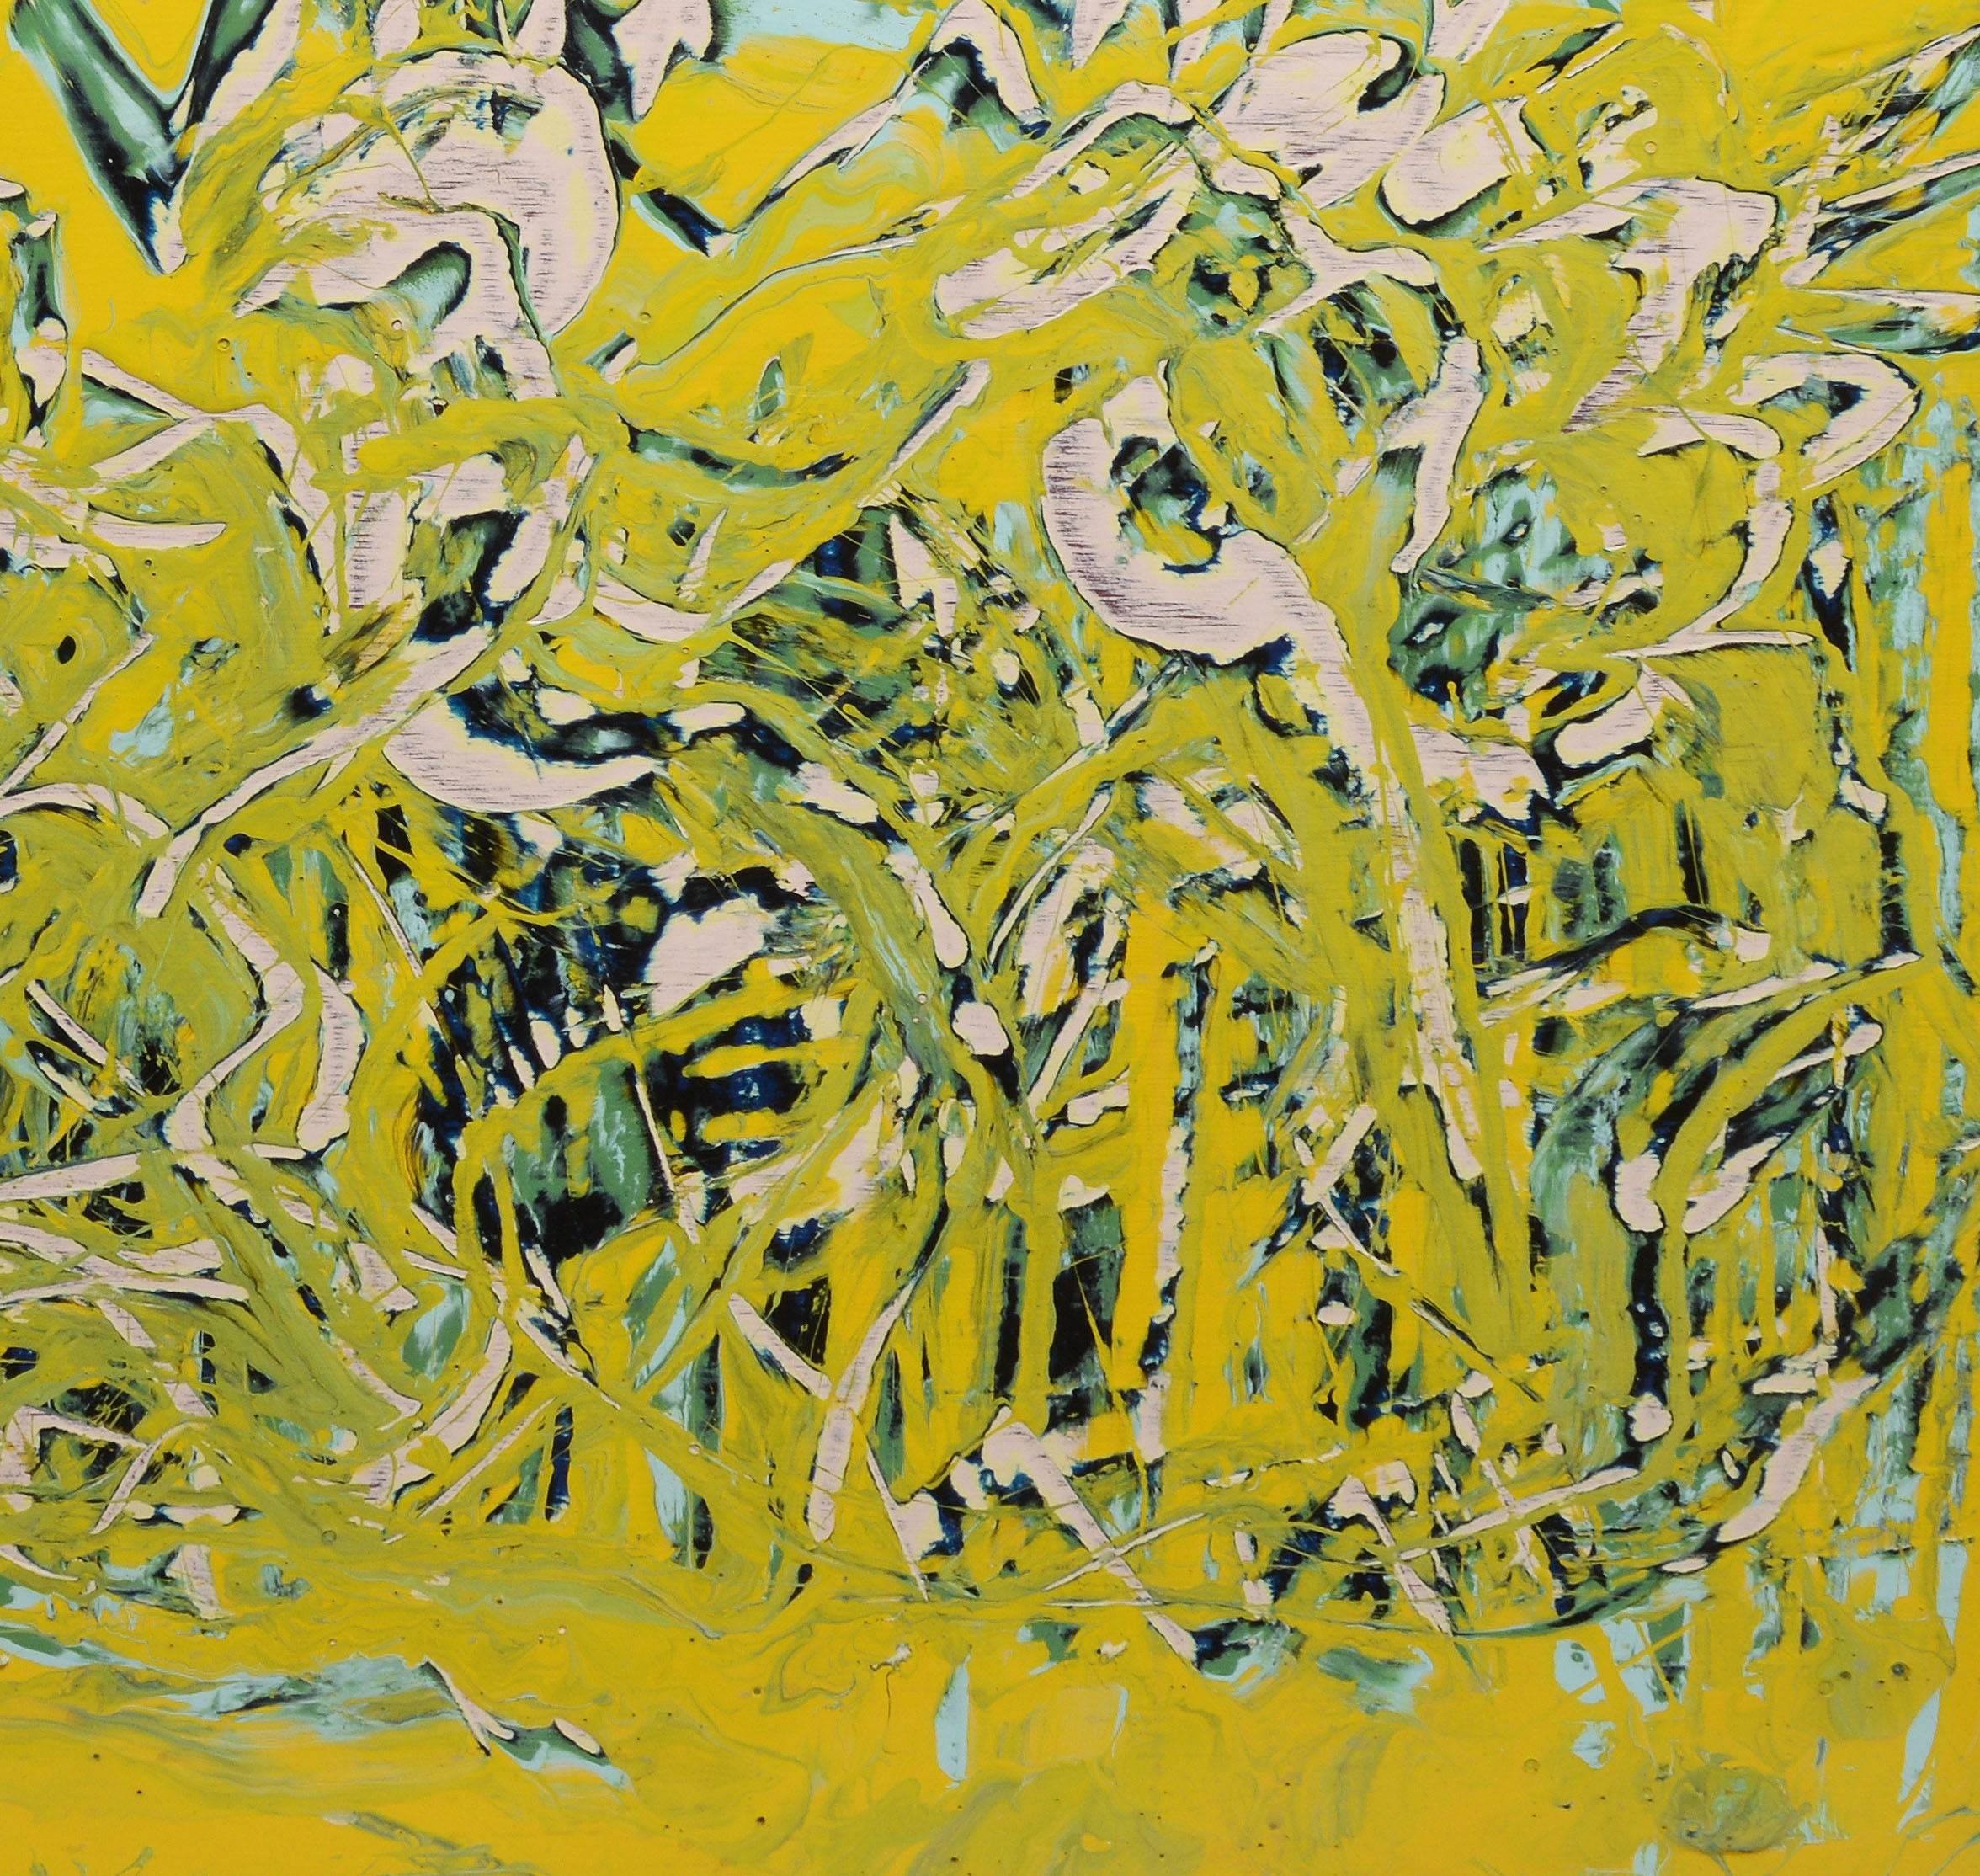 Abstraction in Yellow 3